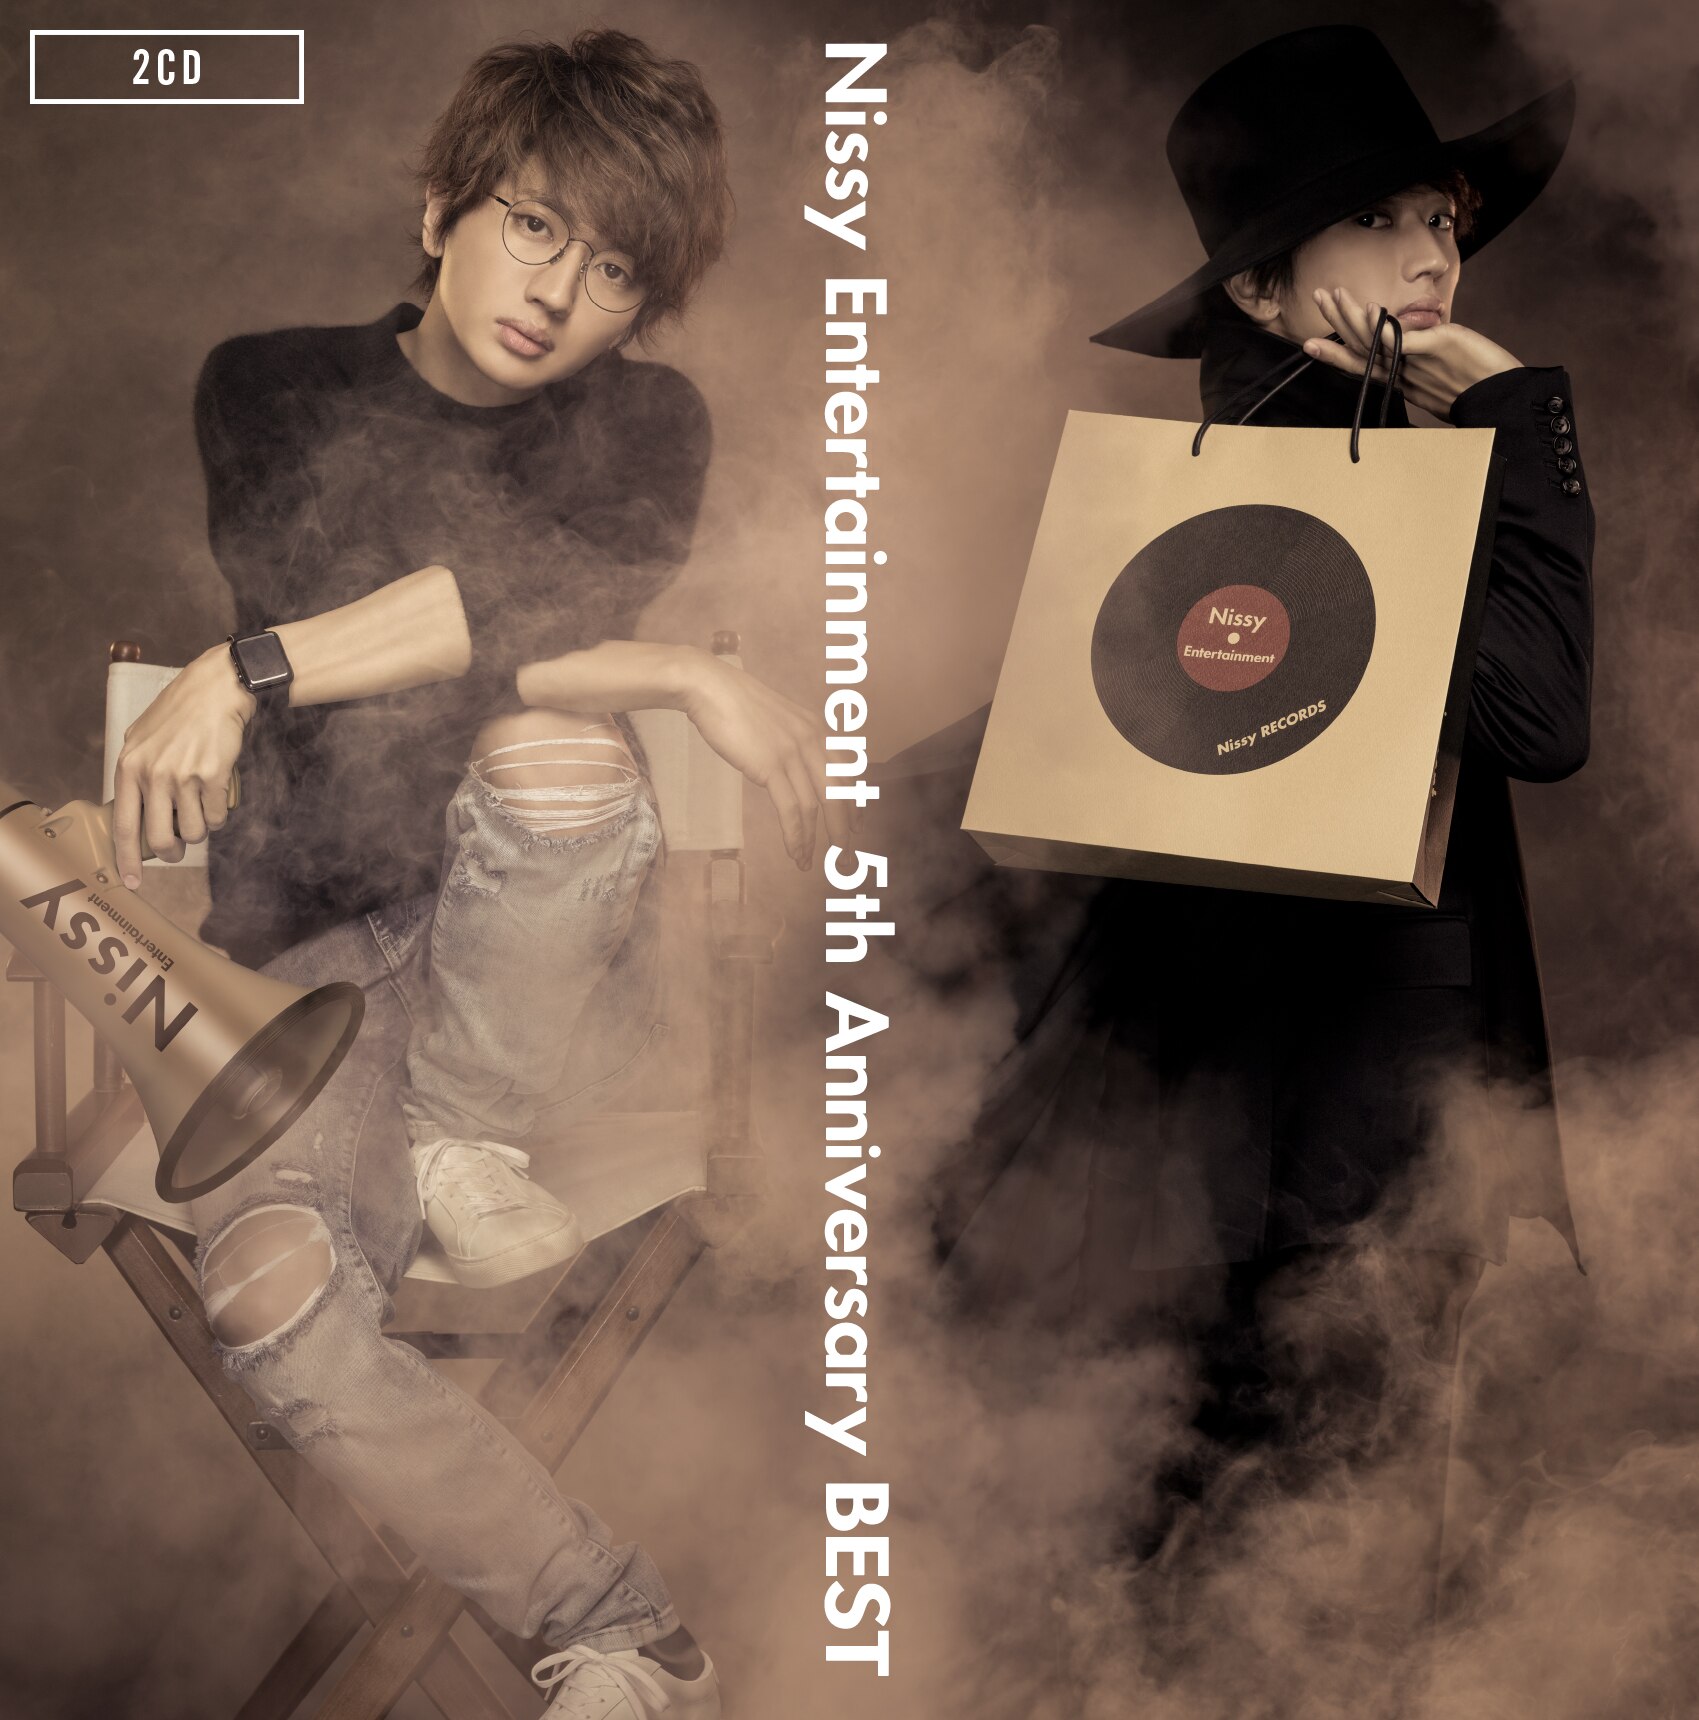 February 4th Nissy S Day Release Best Album Nissy Entertainment 5th Anniversary Best Jacket Photo Contents Released Reservation Purchase Privilege Decided News Nissy Takahiro Nishijima Official Web Site